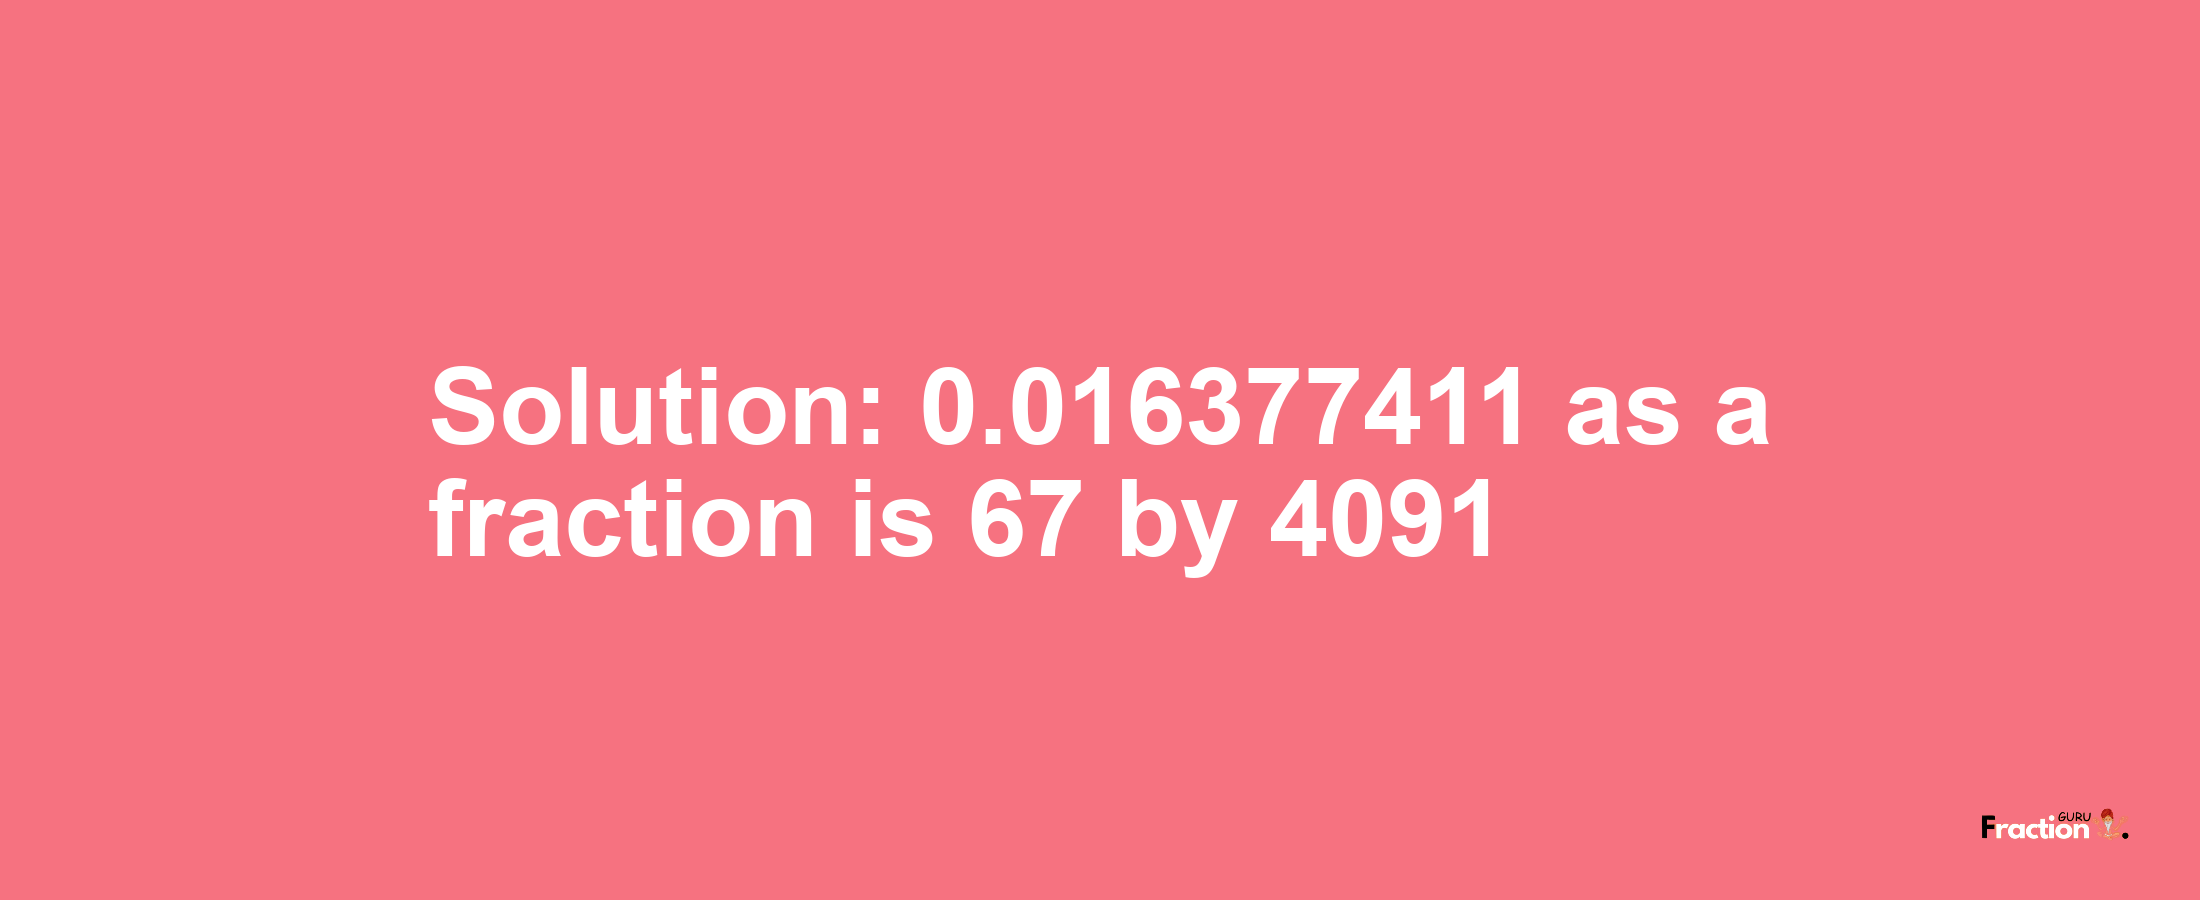 Solution:0.016377411 as a fraction is 67/4091